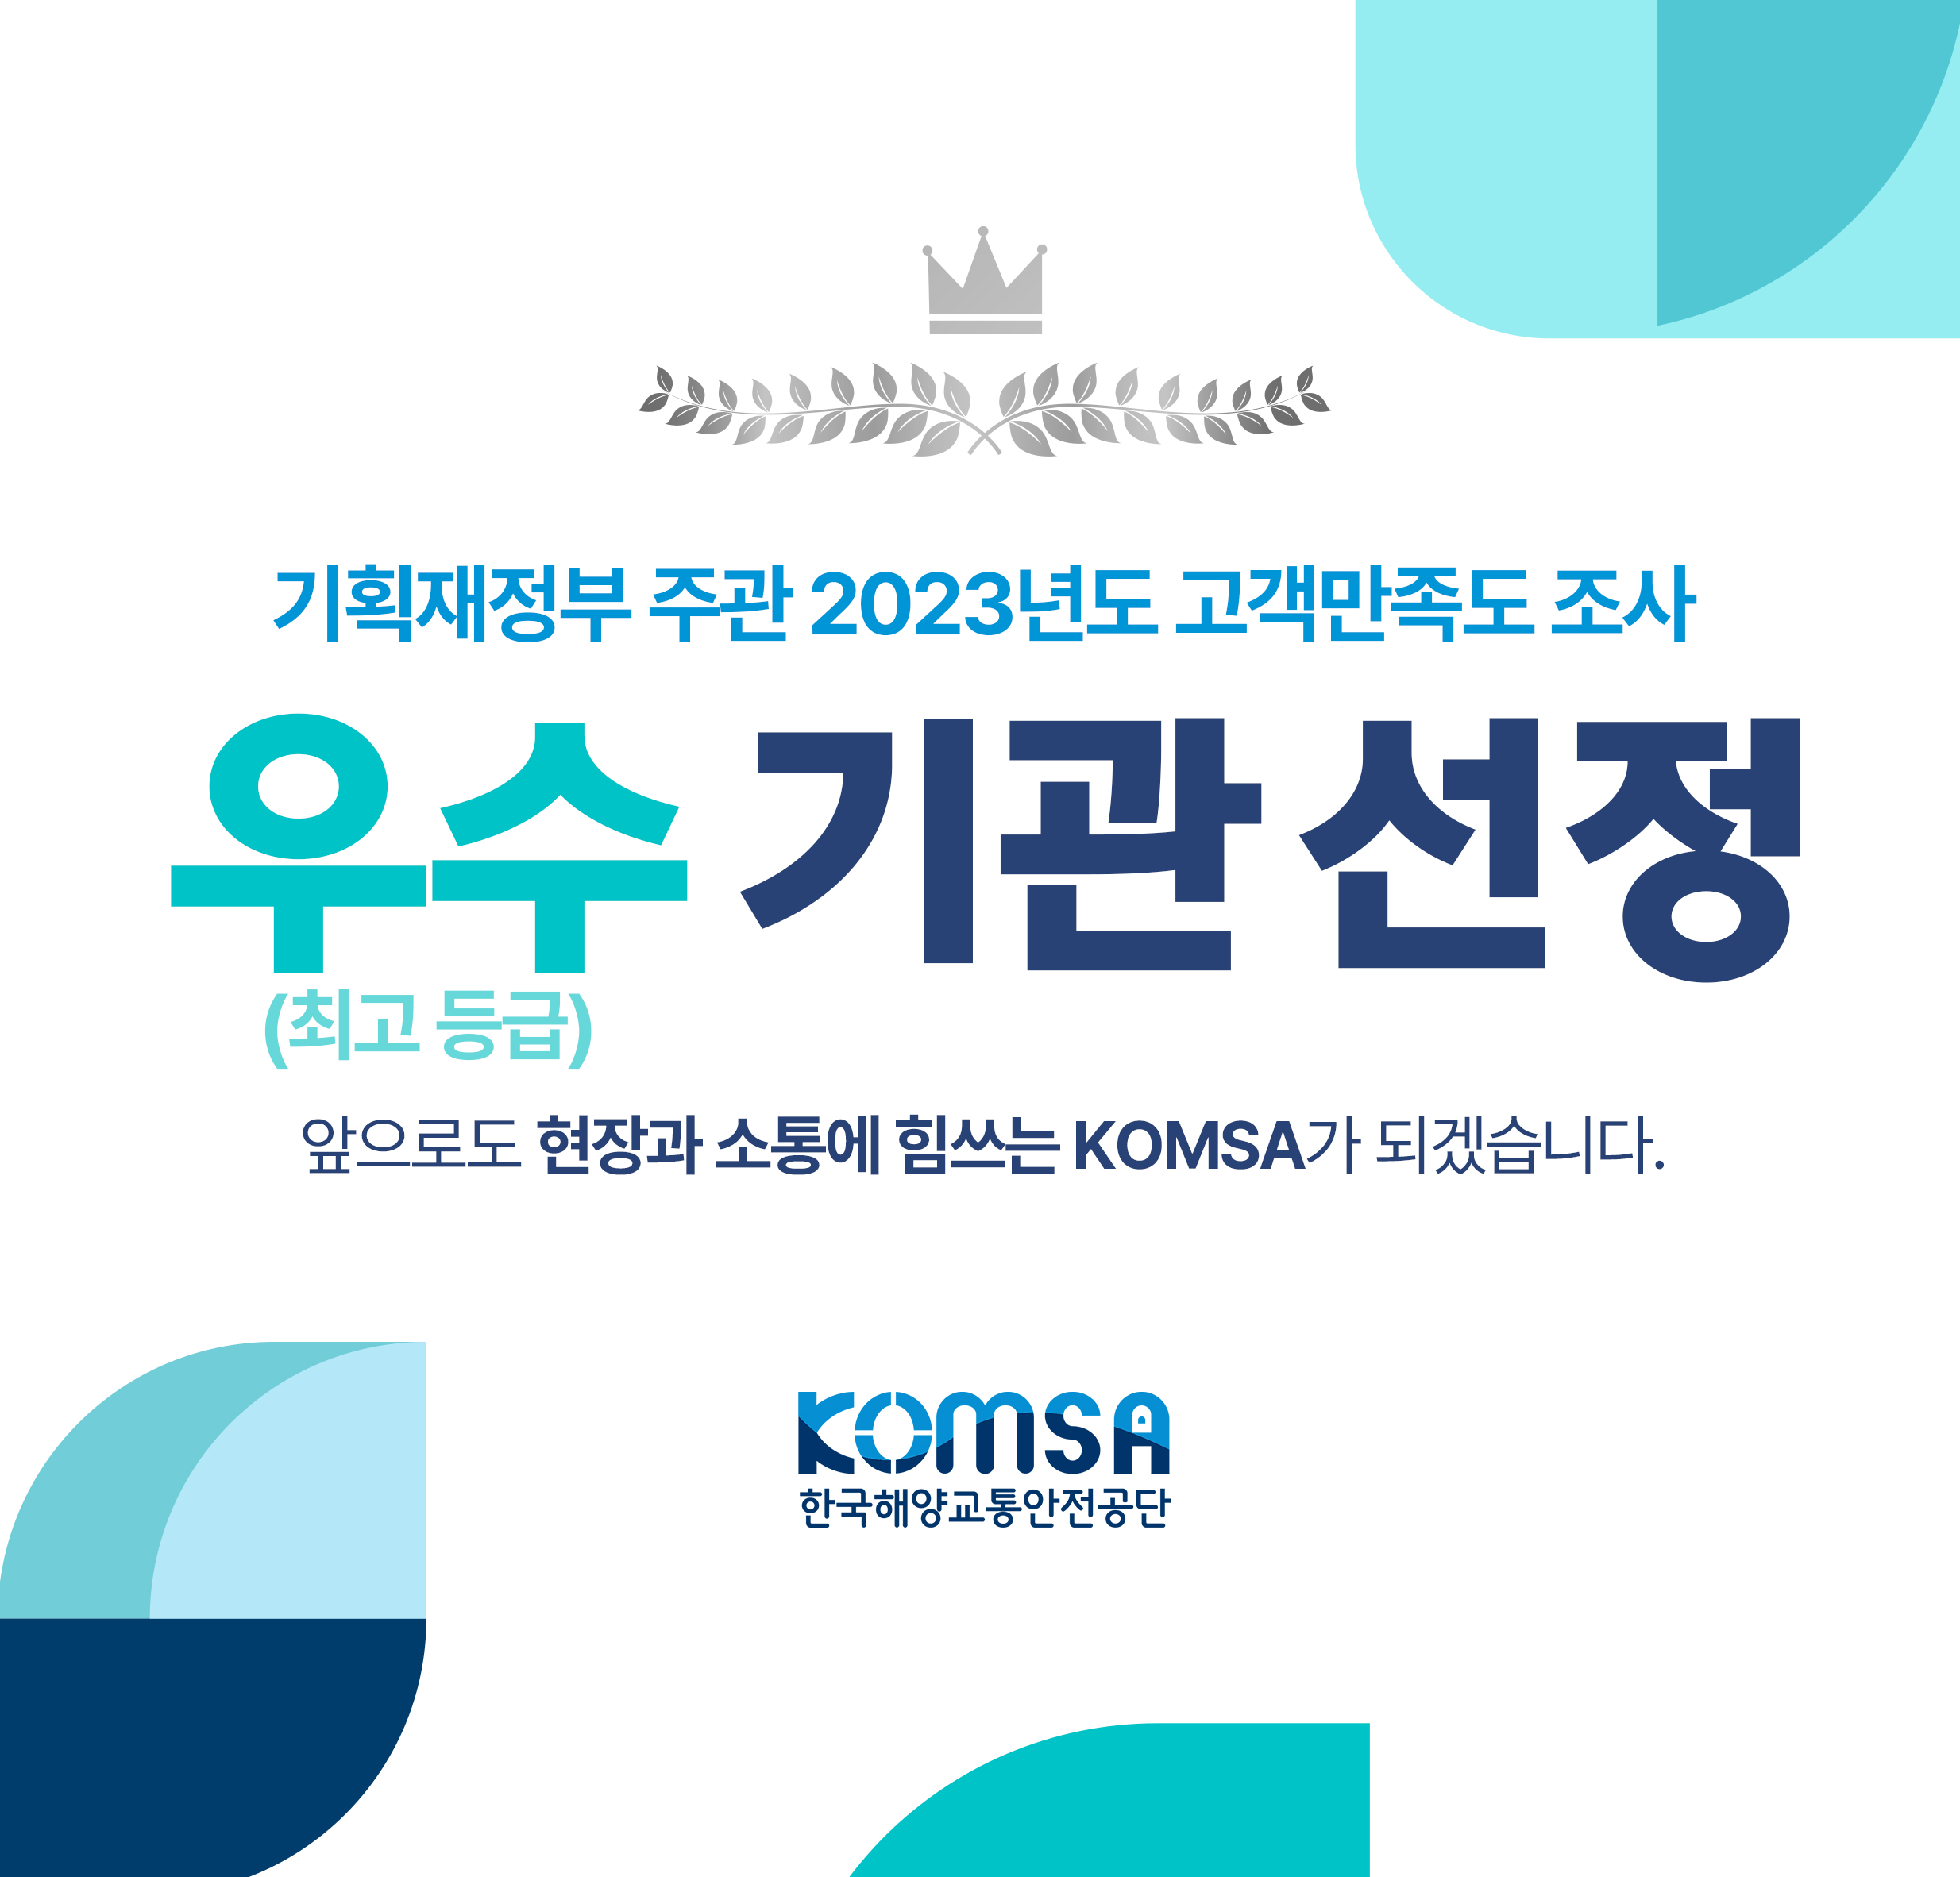 https://www.komsa.or.kr/kor/;jsessionid=349378941648AED7F68CBBF1EED271C8